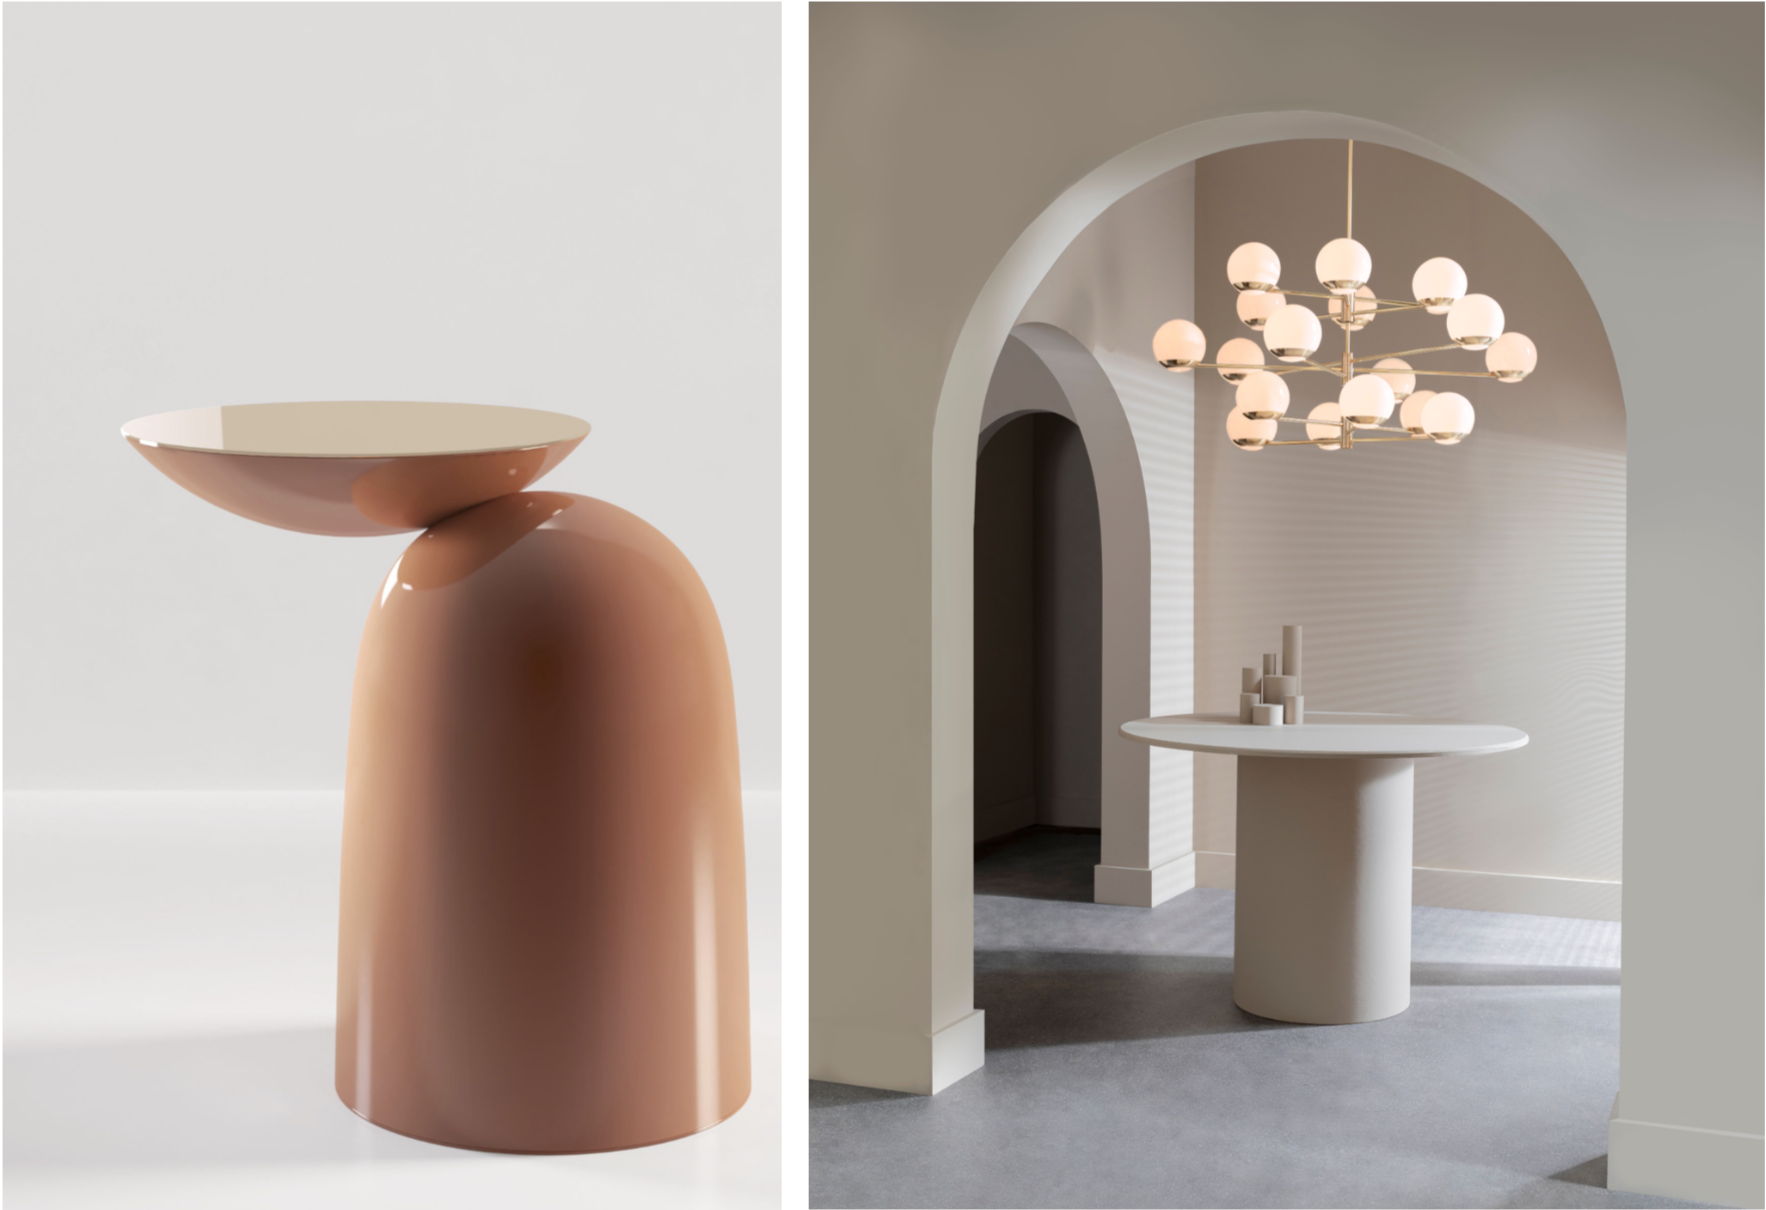 Pingu side table by Secolo and Ball & Hoop Light by Empty State